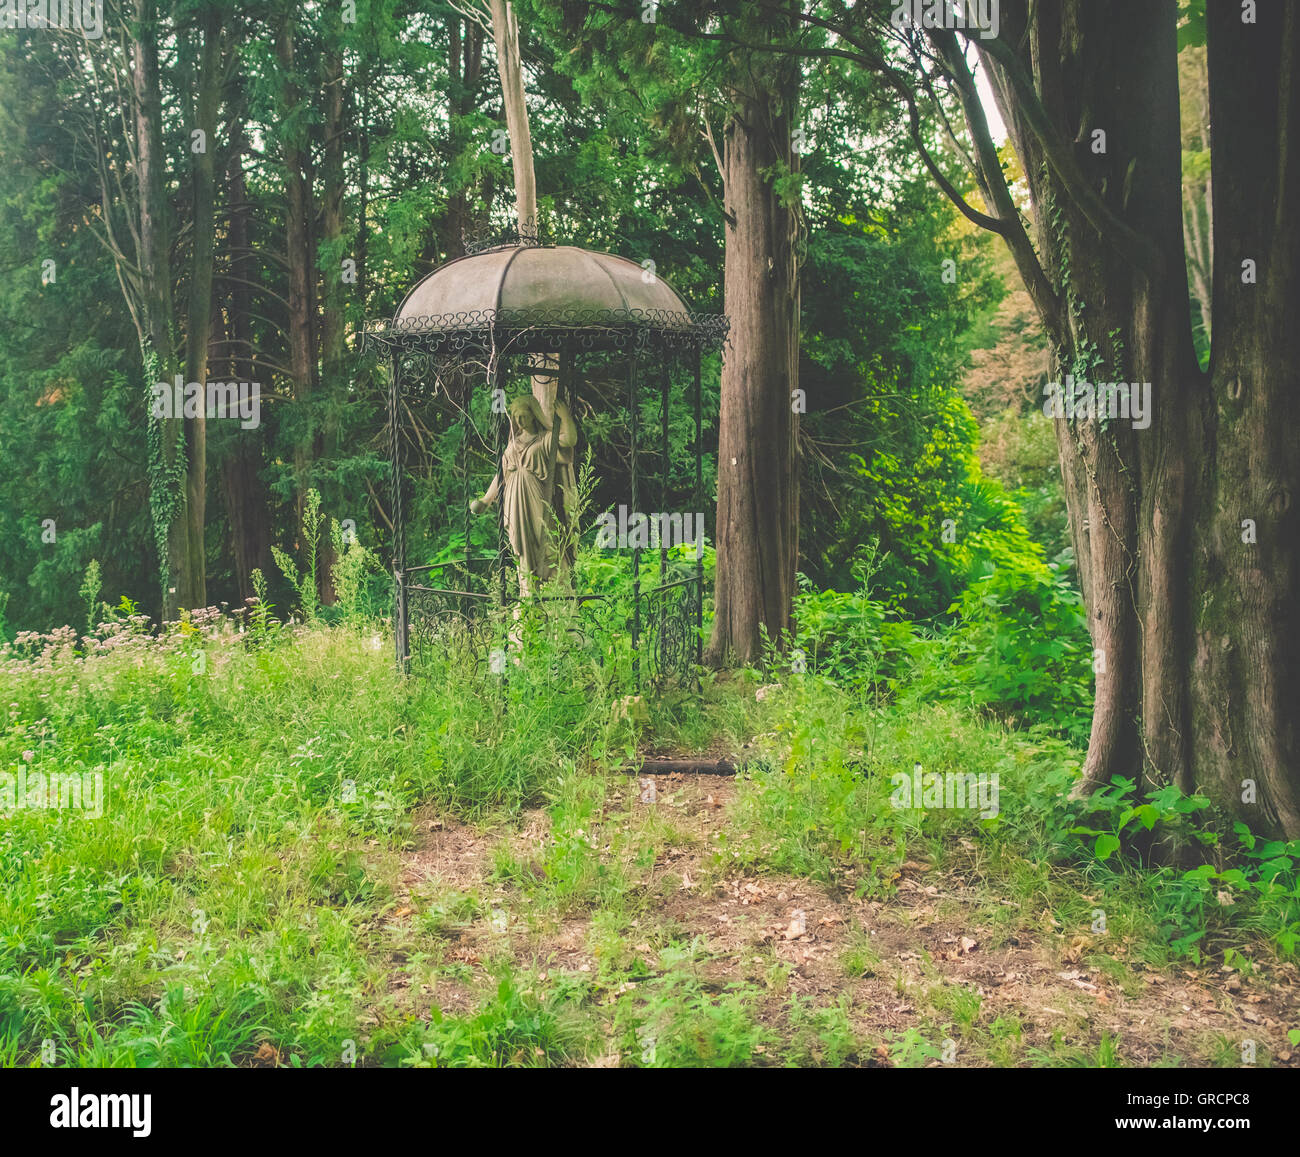 Abandoned statue of the Madonna in a garden Stock Photo